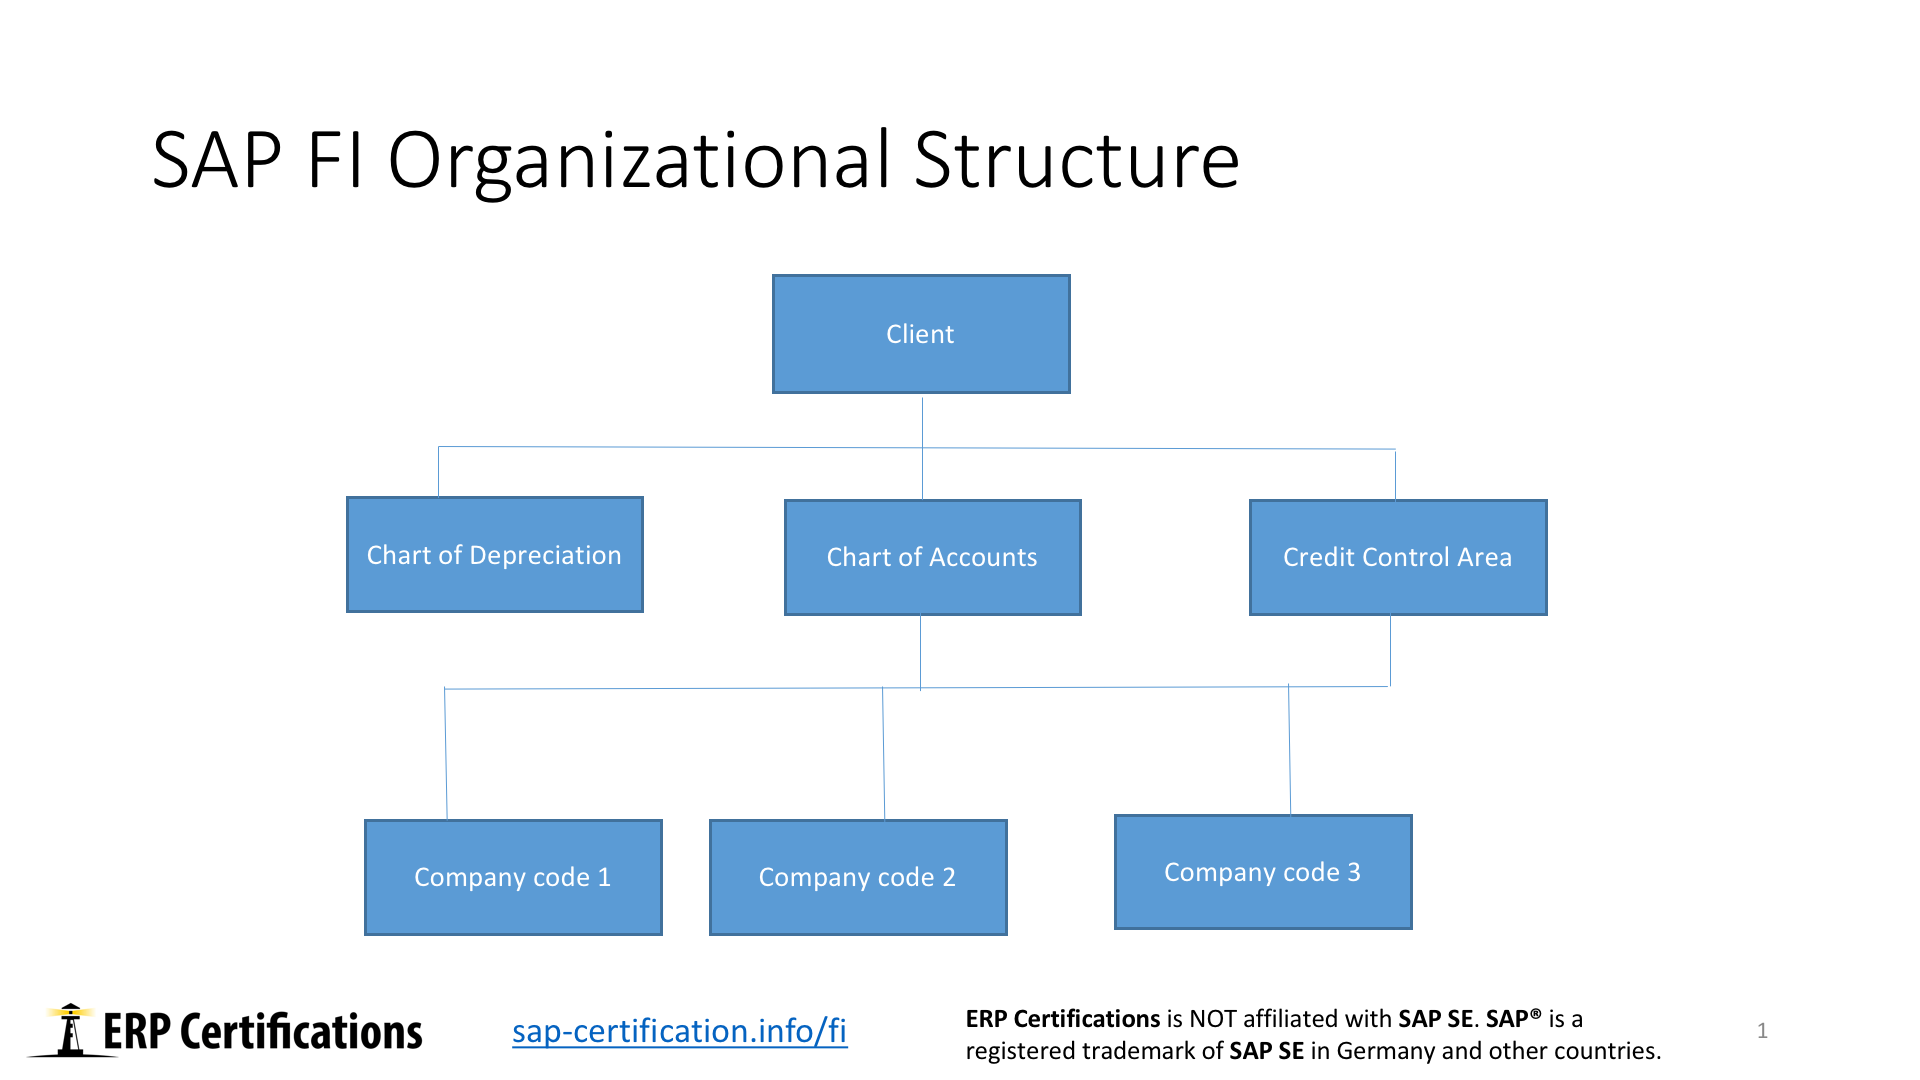 Functional Organisational Structure - A-Z of business terminology